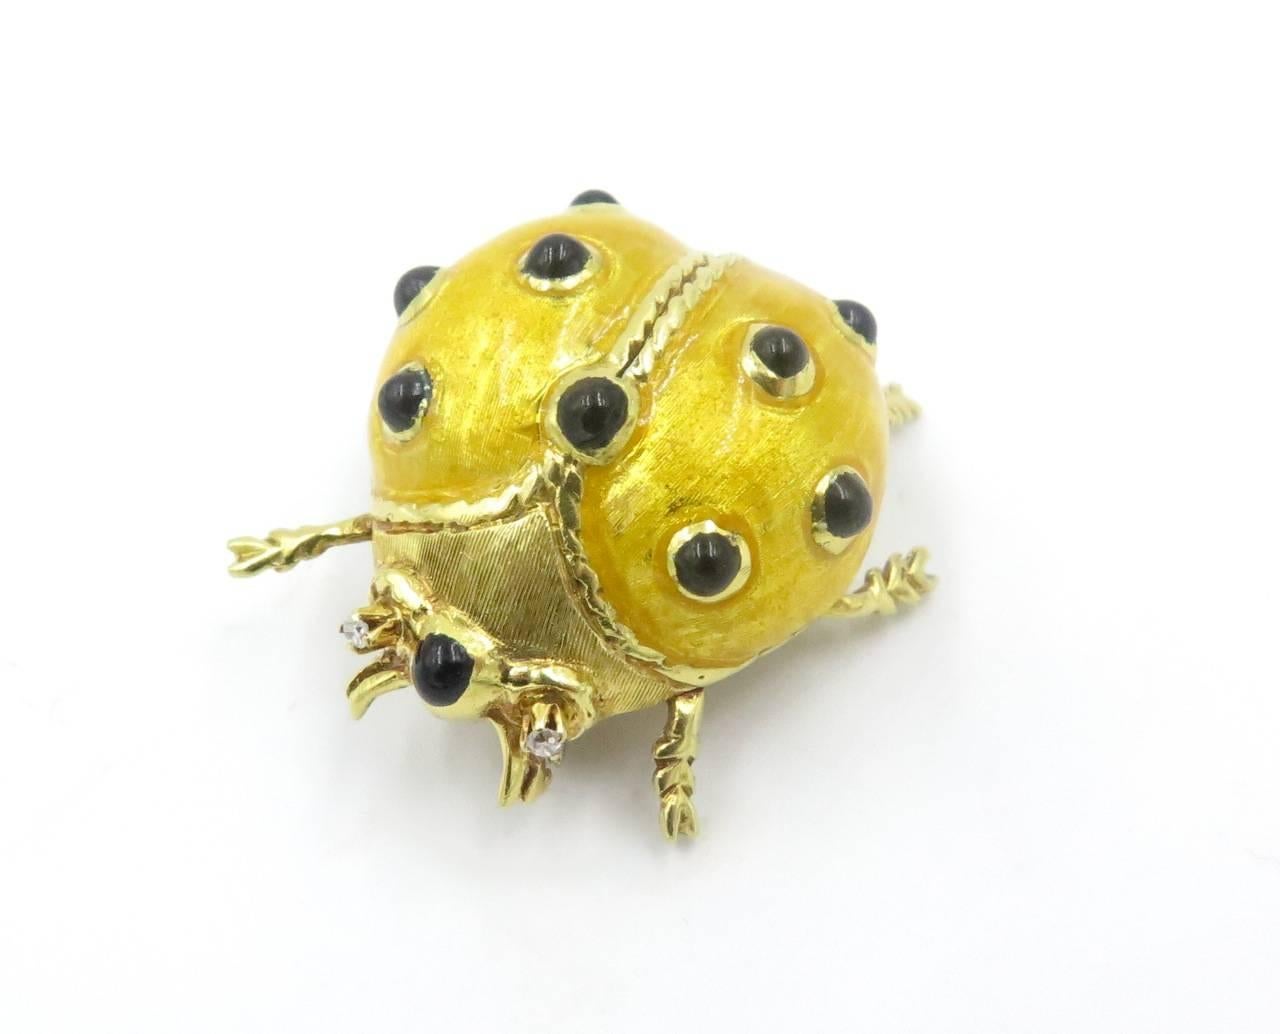 A pair of 18 karat yellow gold, enamel and diamond lady bug brooches.  Circa 1980. Each designed as a green or yellow enamel bug, decorated with black enamel spots, with circular-cut diamond eyes. Length of each is approximately 1 inch. Gross weight